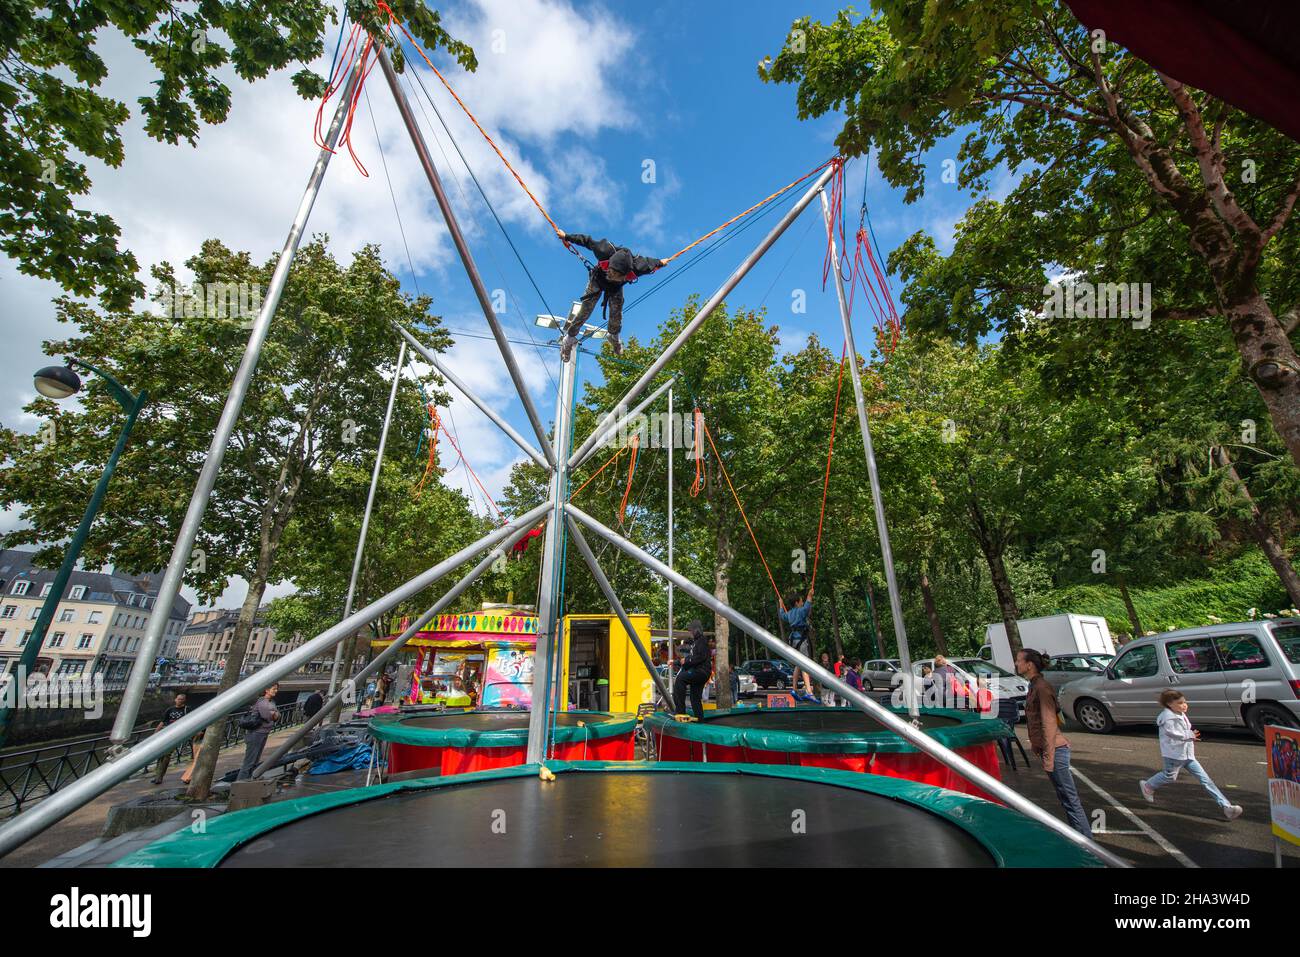 Child on bungee trampoline, Quimper, Brittany, France Stock Photo - Alamy